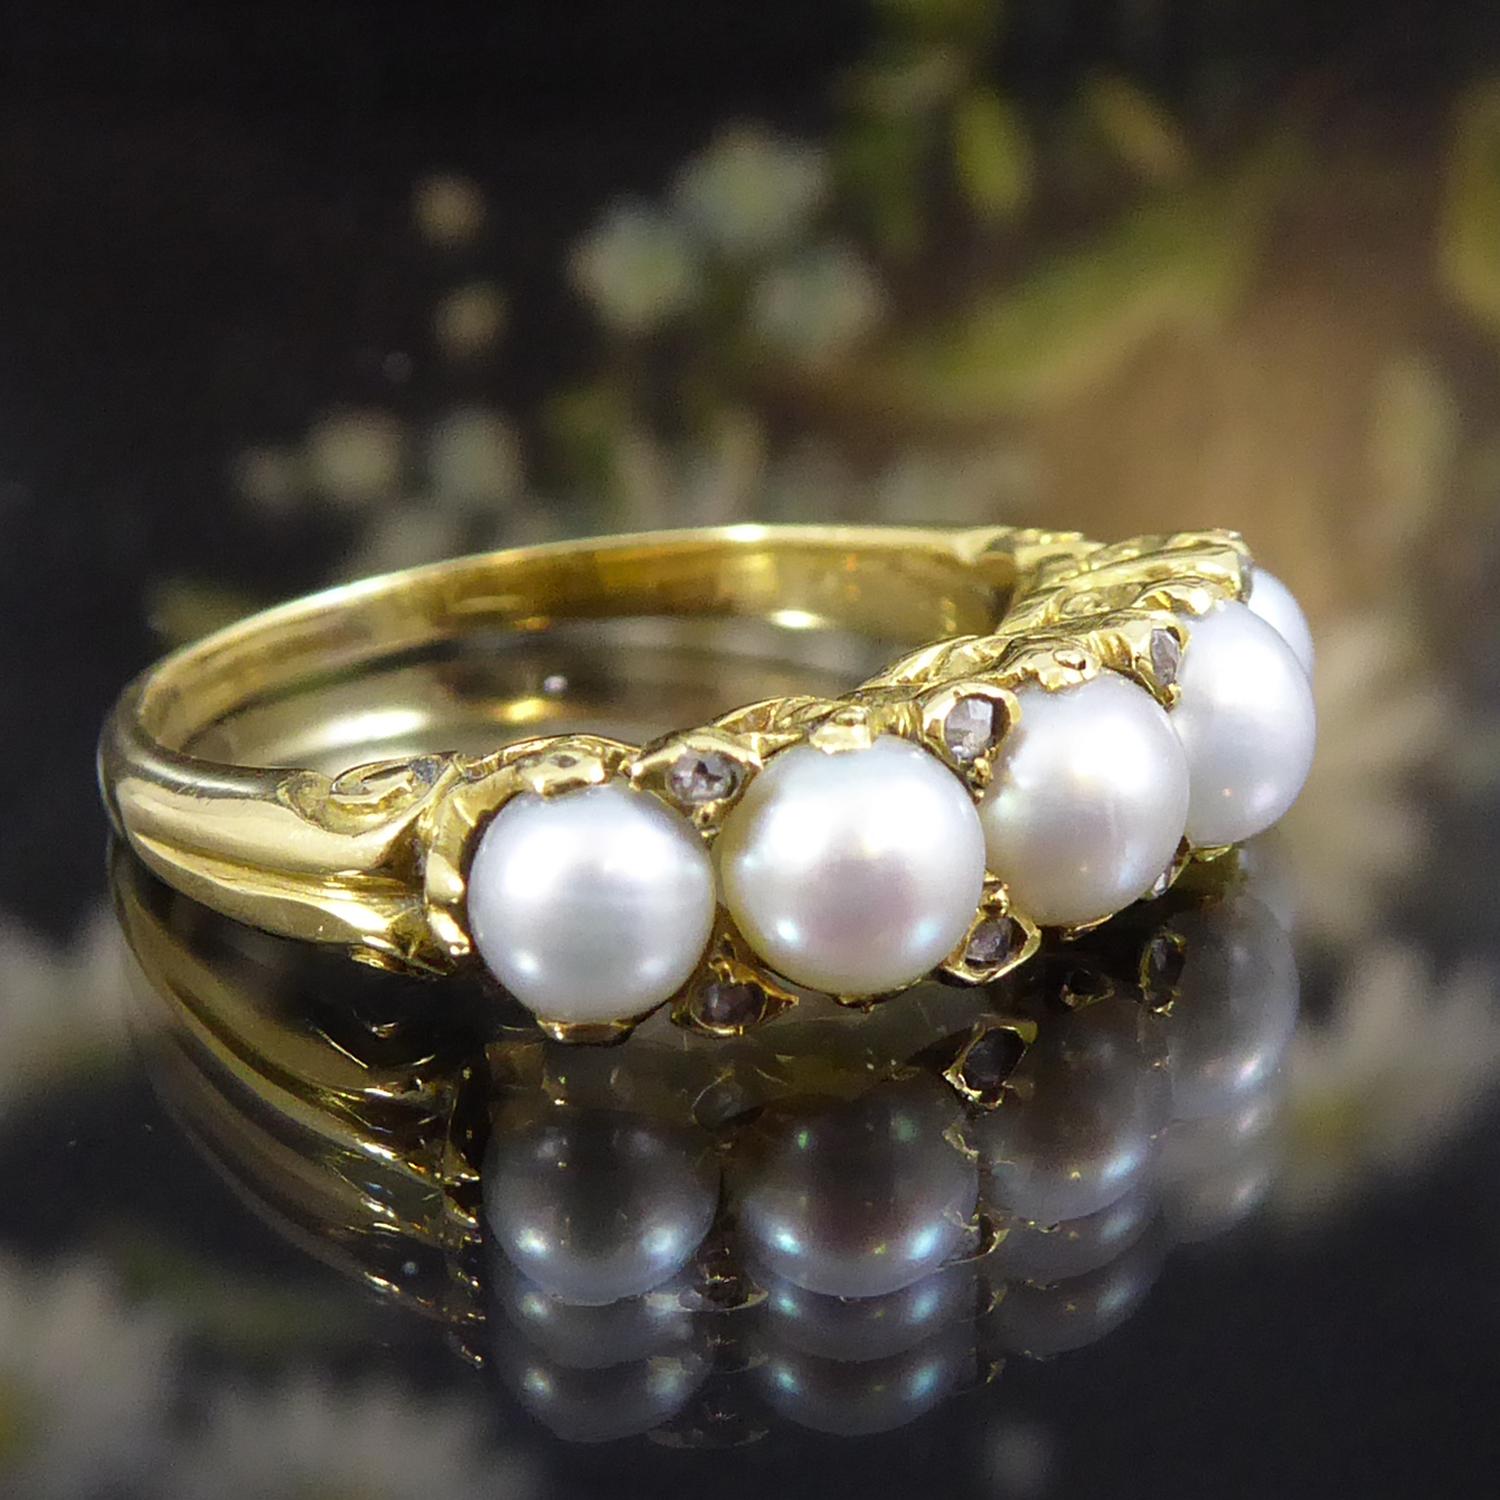 A stunnning five stone ring from the Edwardian era circa 1900s comprising five round creamy white pearls in a row across the finger.  The pearls are claw set to a decorative yellow gold  gallery and in the space between each pearl, to either edge of